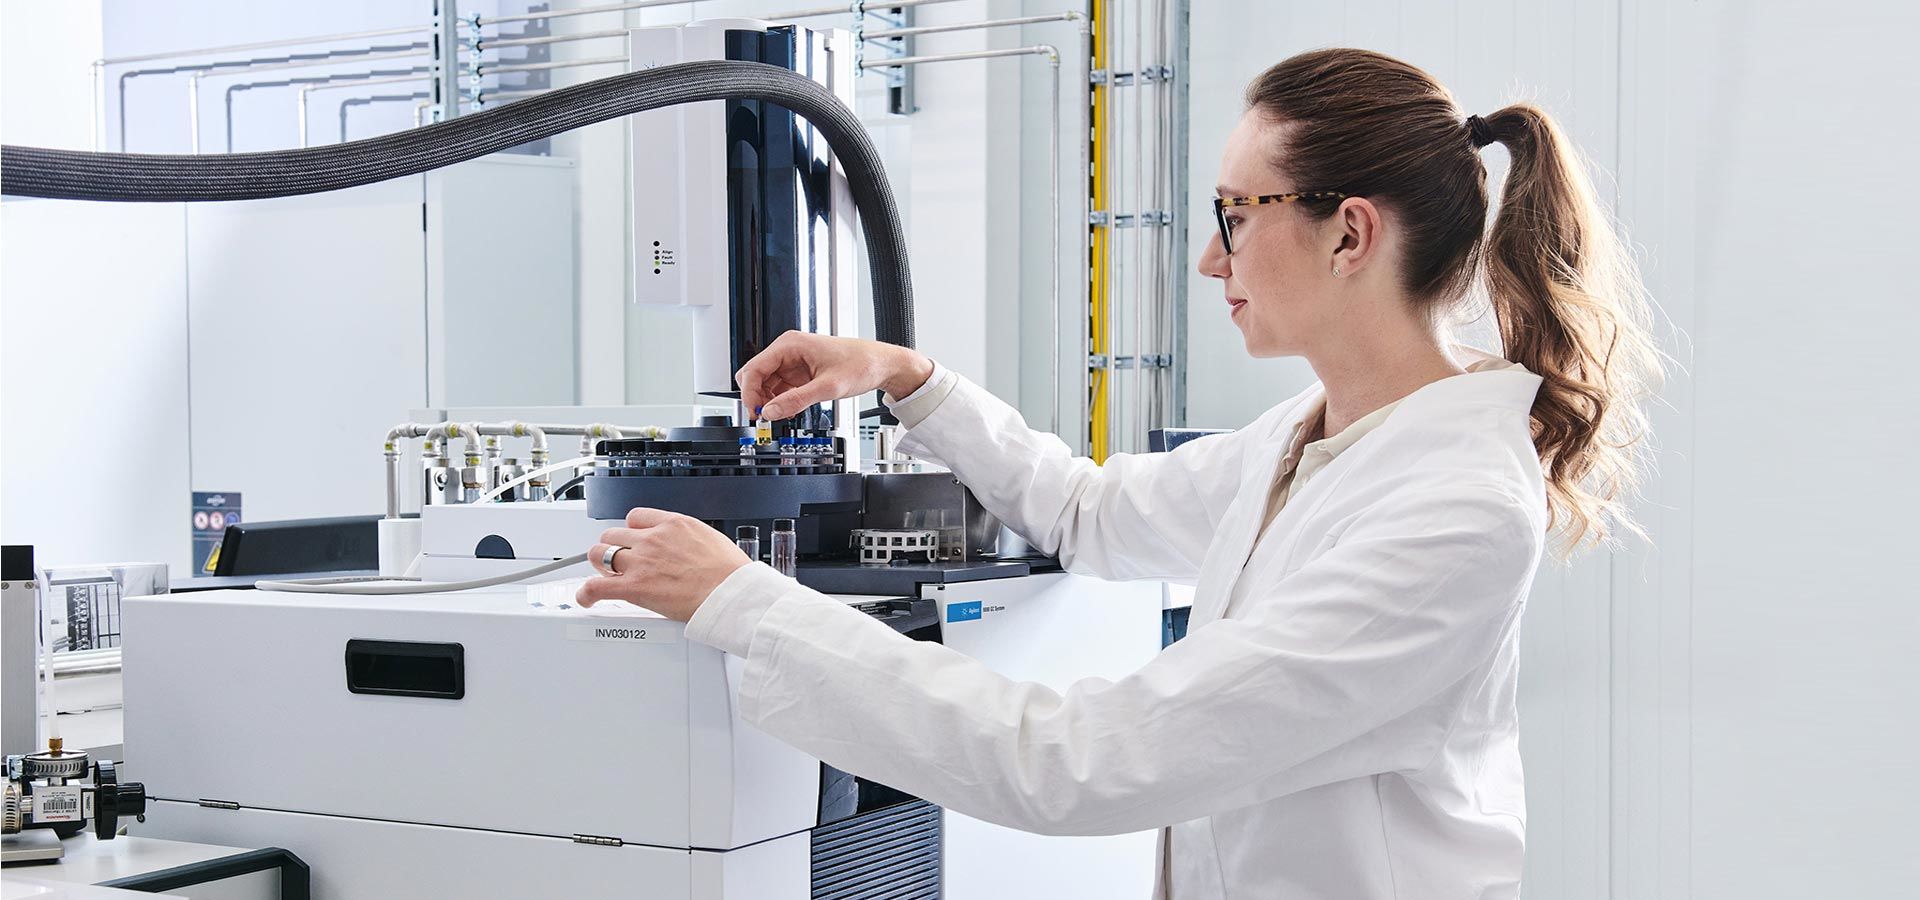 Accredited testing laboratory and analysis center for industrial quality assurance